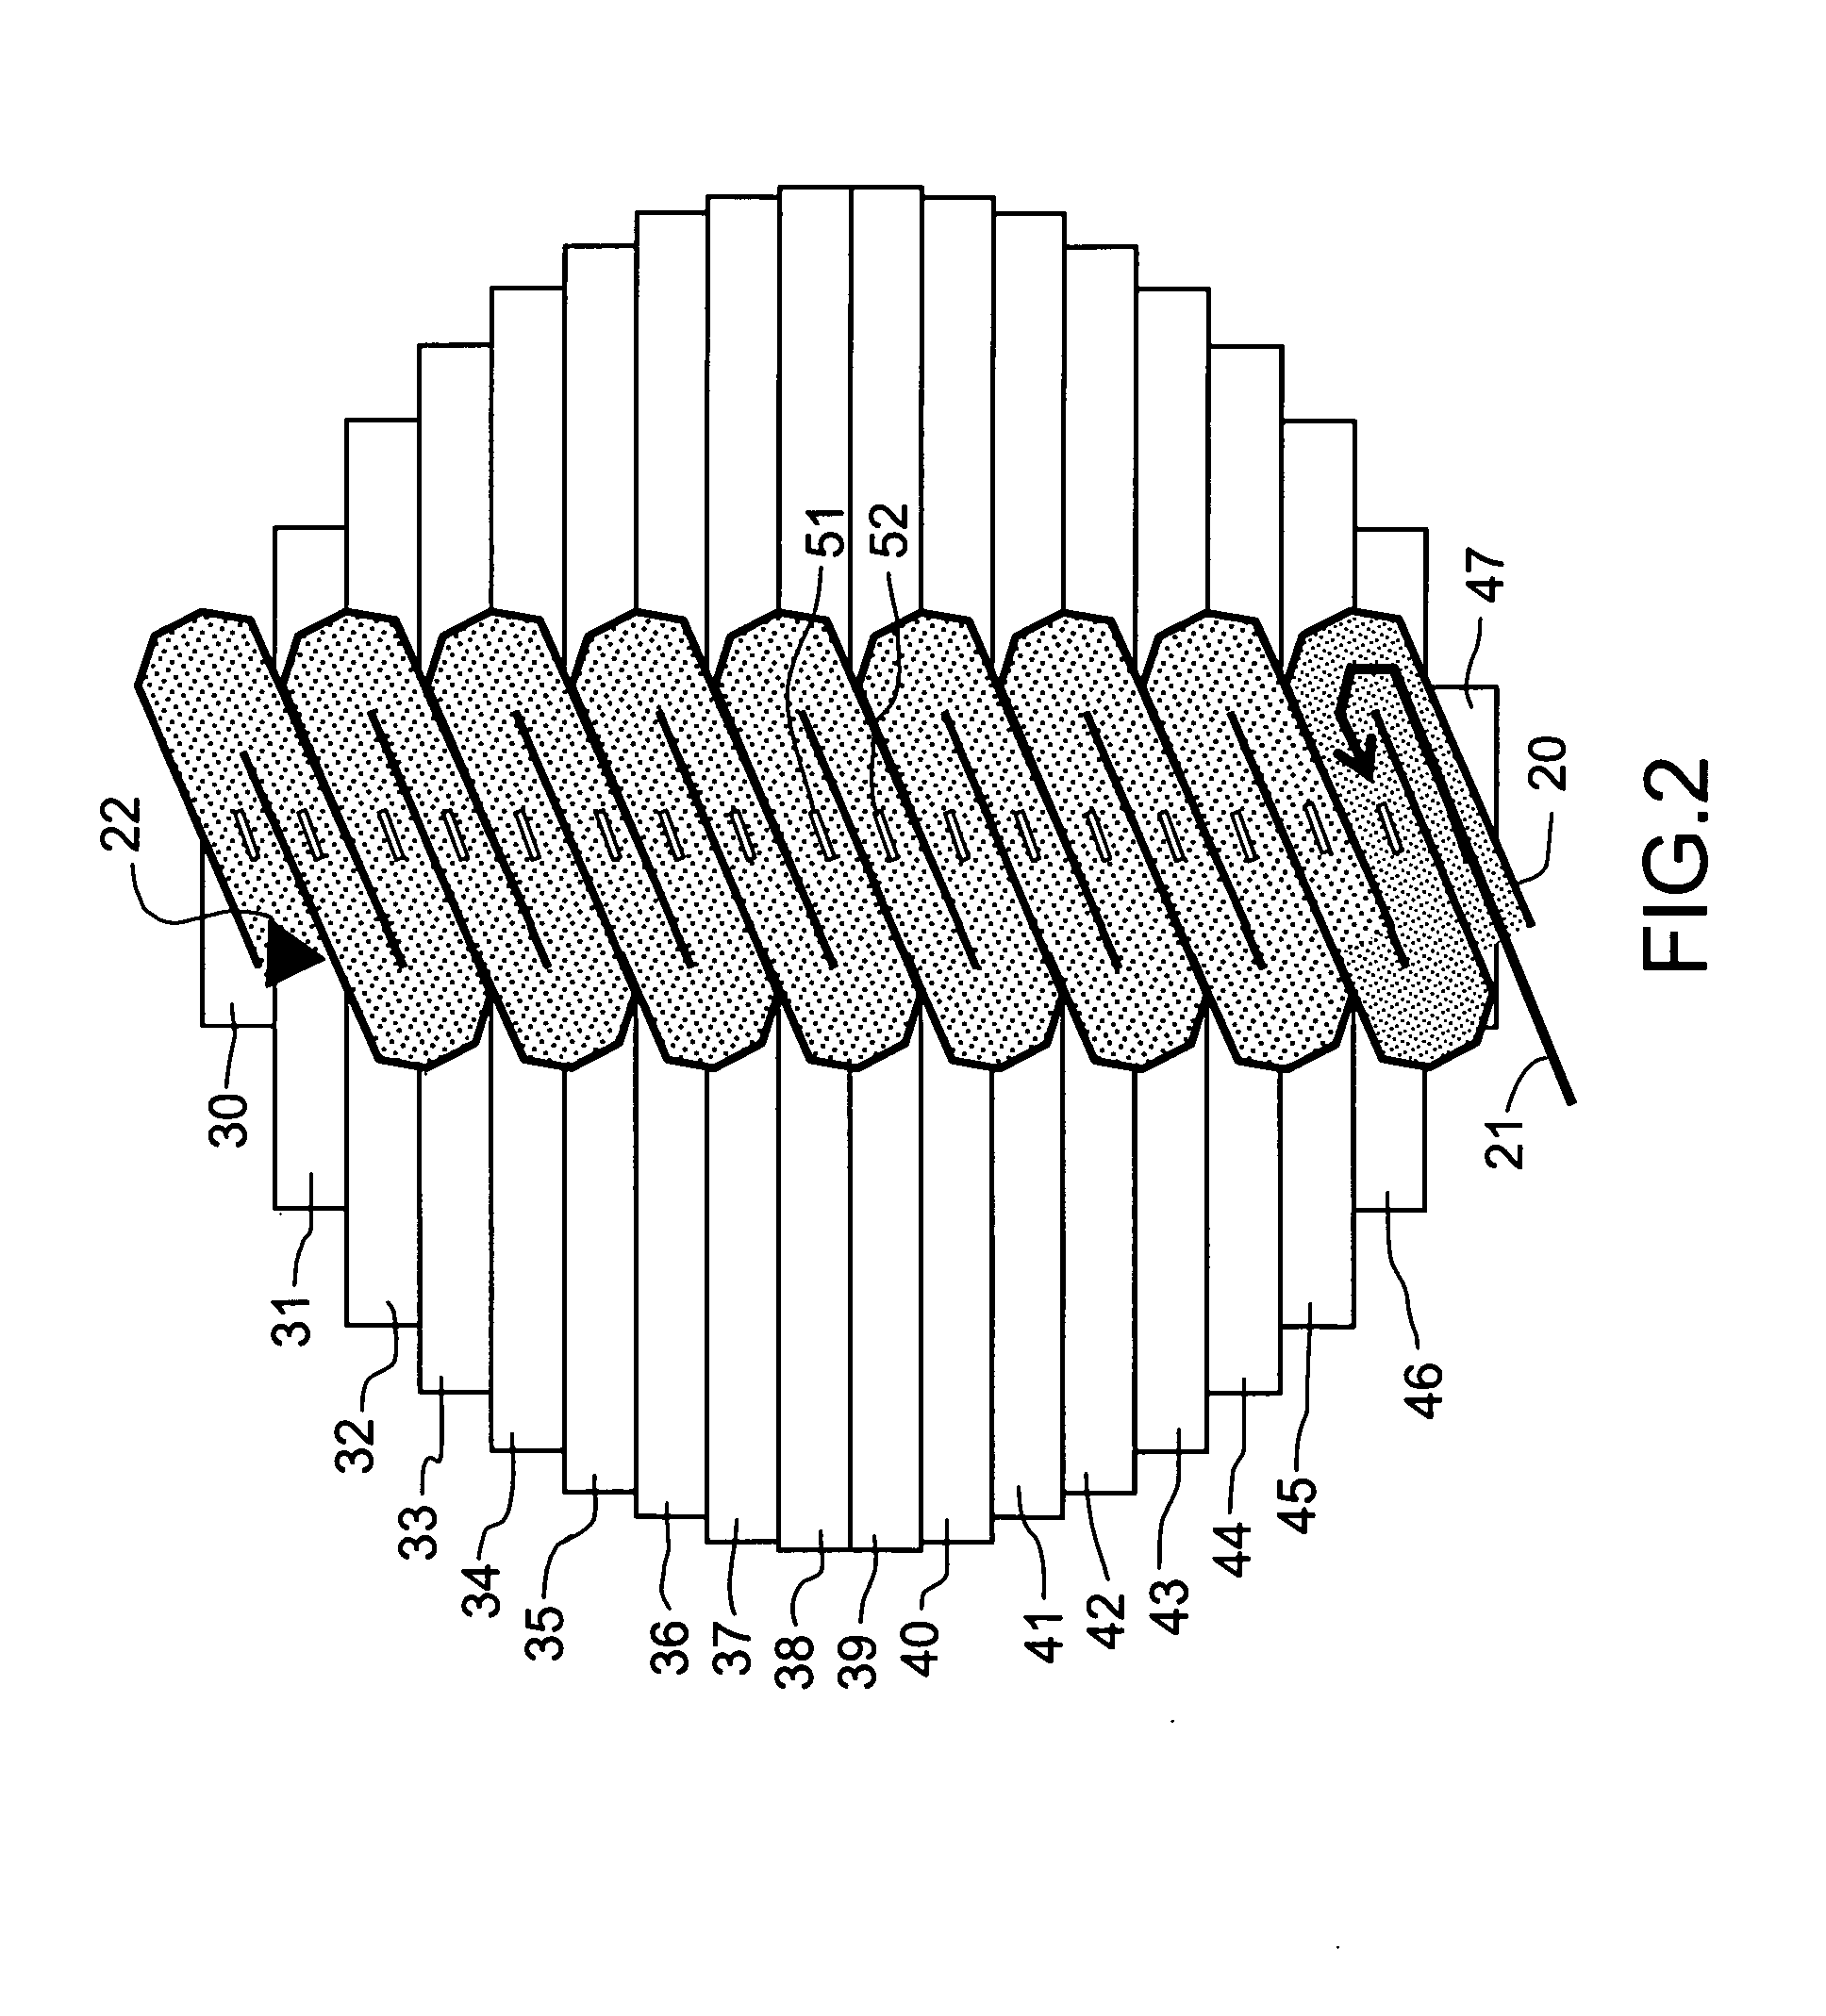 Antenna including a serpentine feed waveguide coupled in parallel to a plurality of radiating waveguides, and method of fabricating such antennas